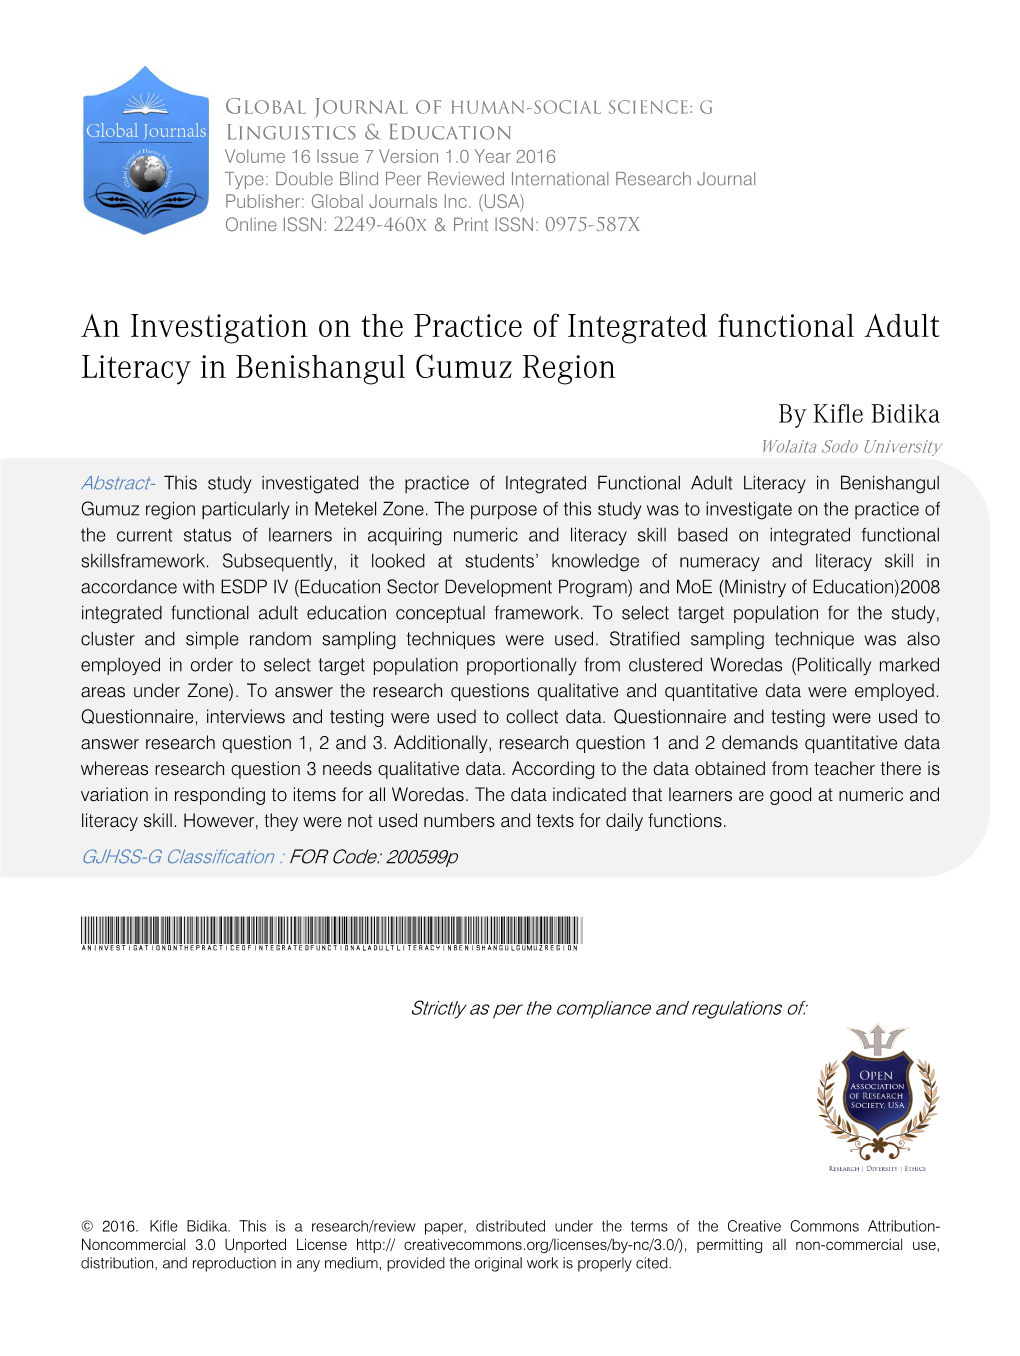 An Investigation on the Practice of Integrated Functional Adult Literacy